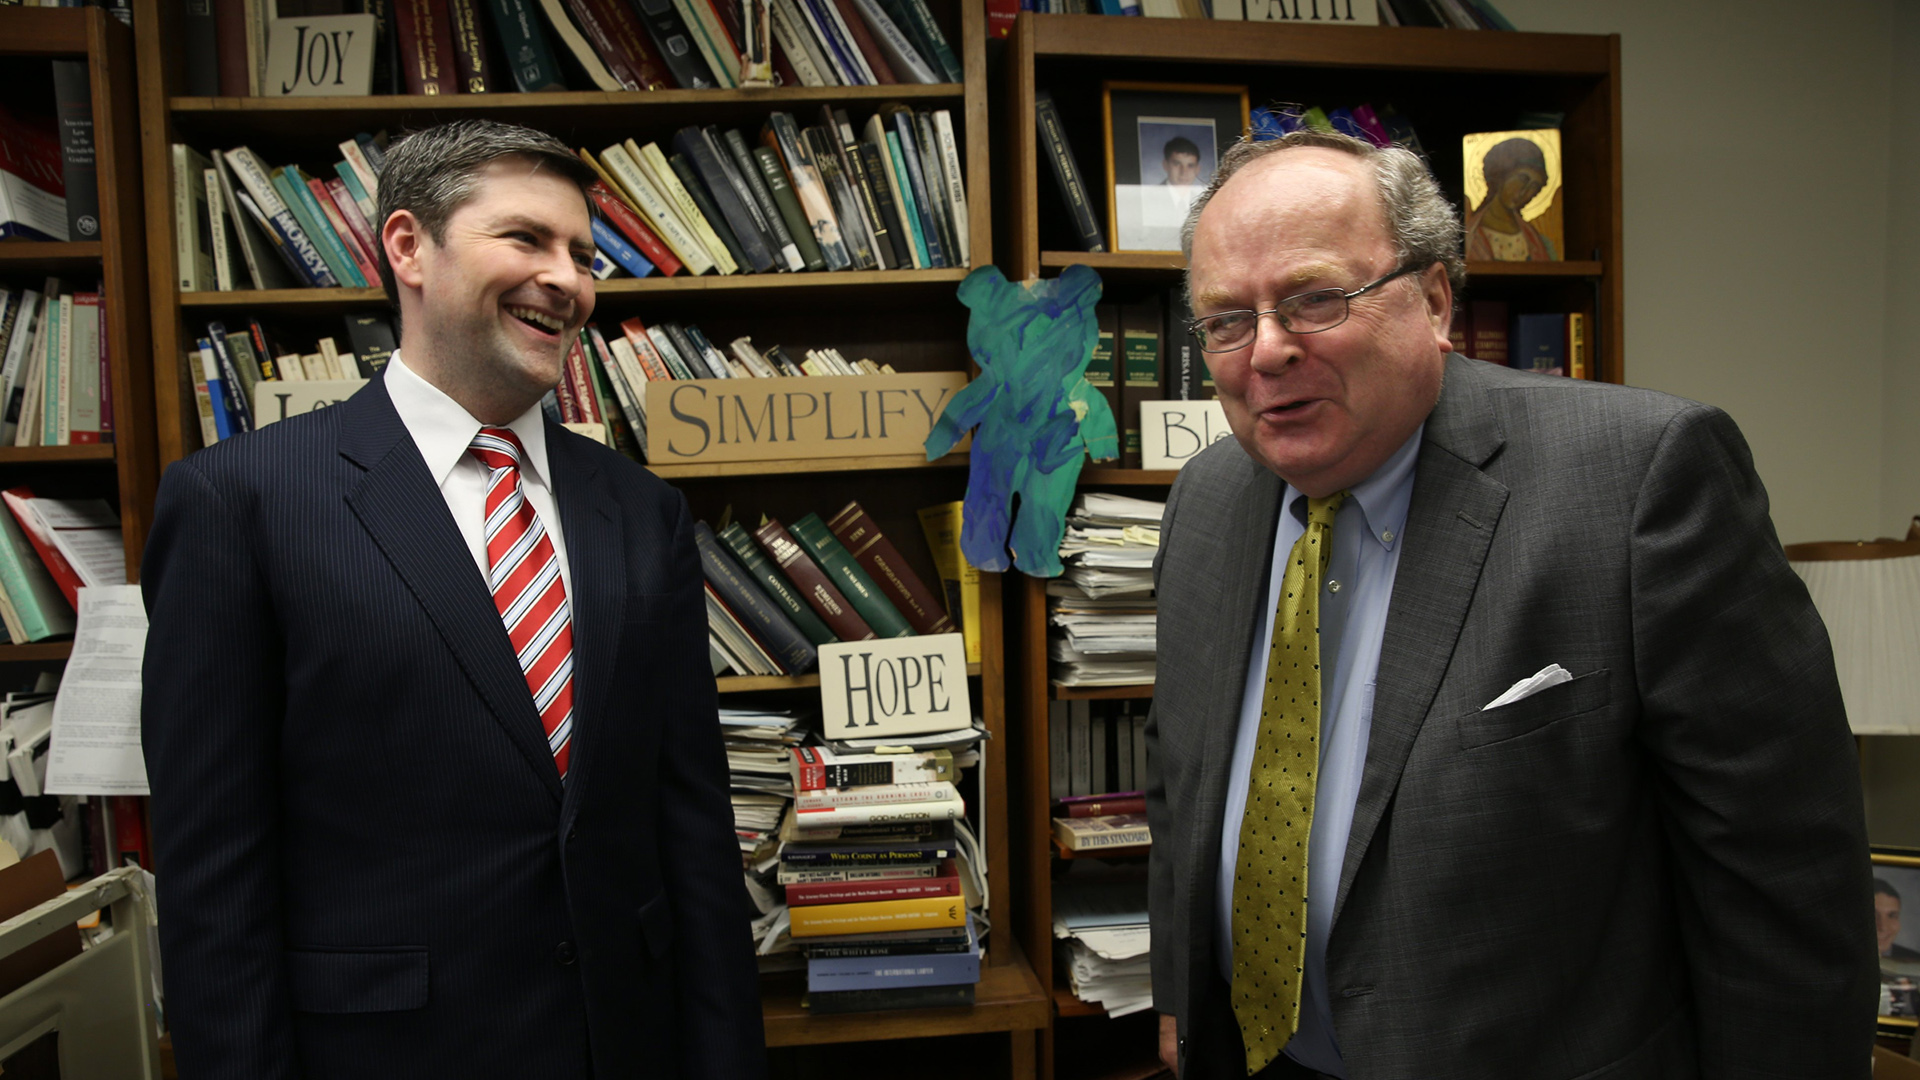 Peter Breen and Thomas Brejcha stand in a room with bookshelves in the background.